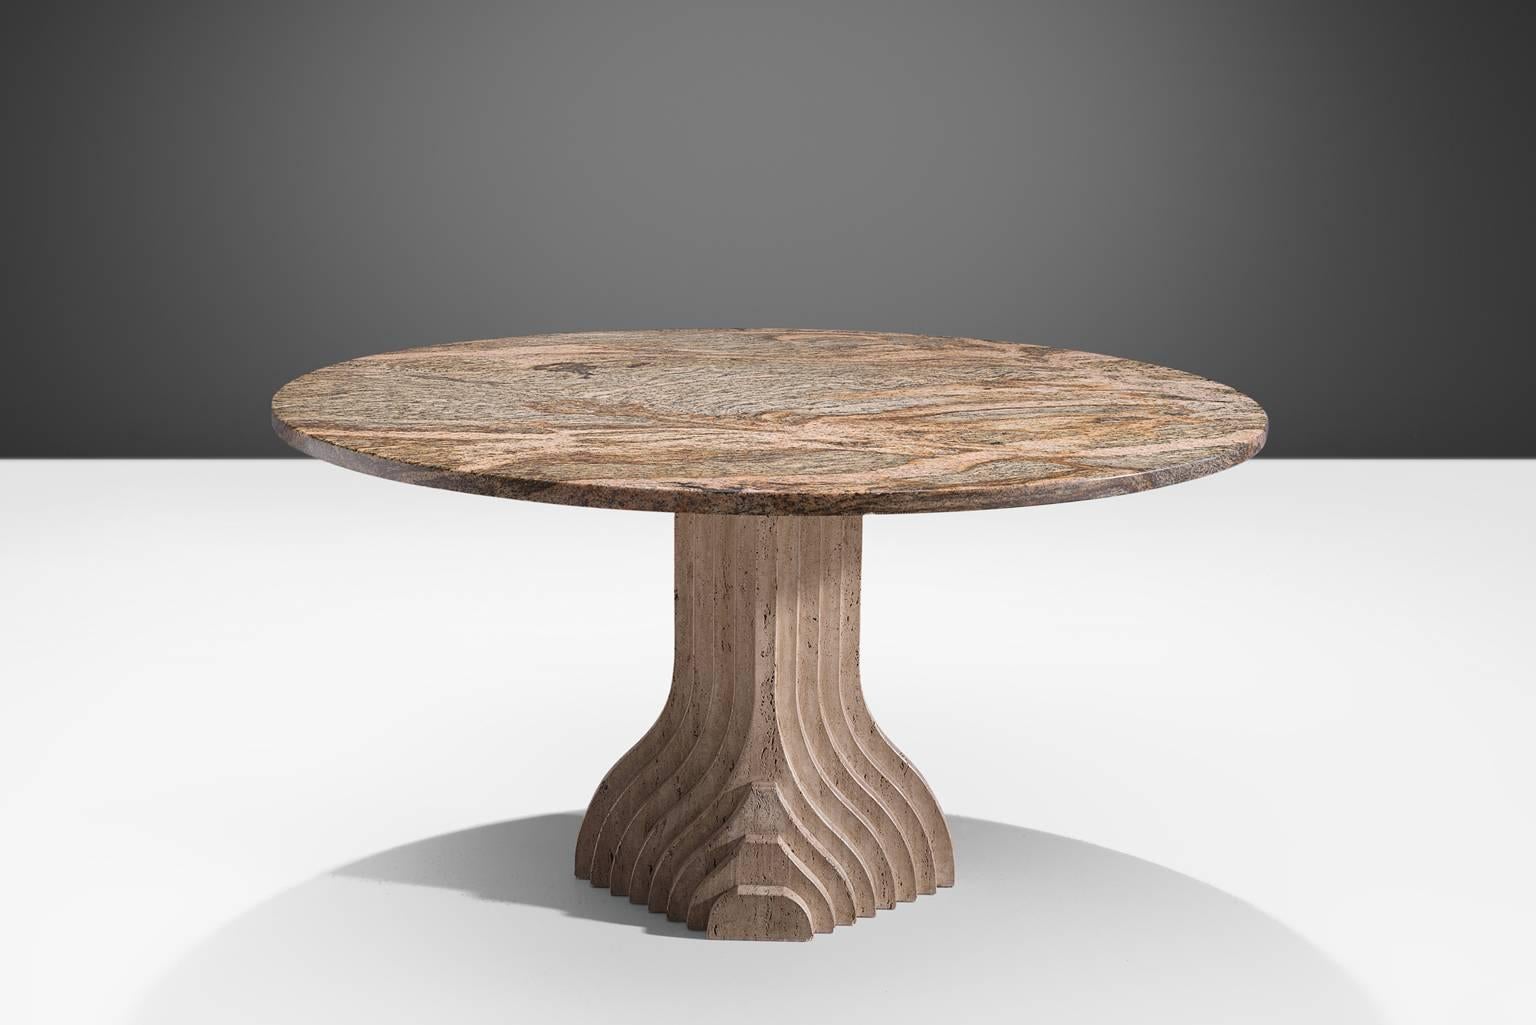 Dining table, travertine and granite, Italy, 1970s

The base of this center table is formed out of a layered pillars that seem exist of several pillars in a row, clearly a reference to the architectural aesthetics of Carlo Scarpa. The circular